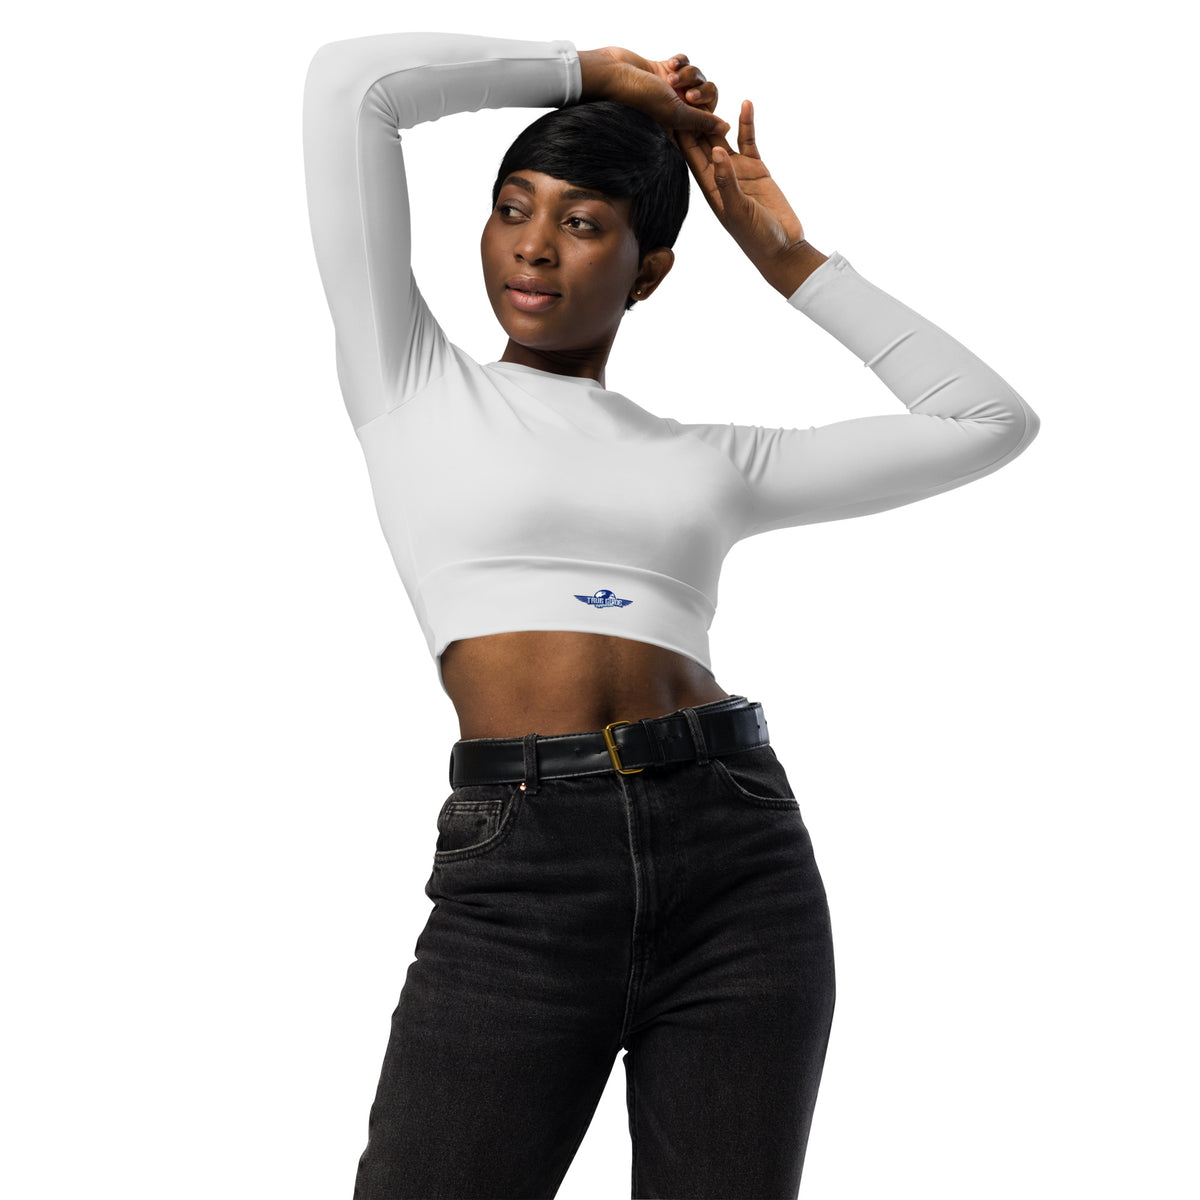 Whisper Gray Recycled Long-Sleeve Crop Top